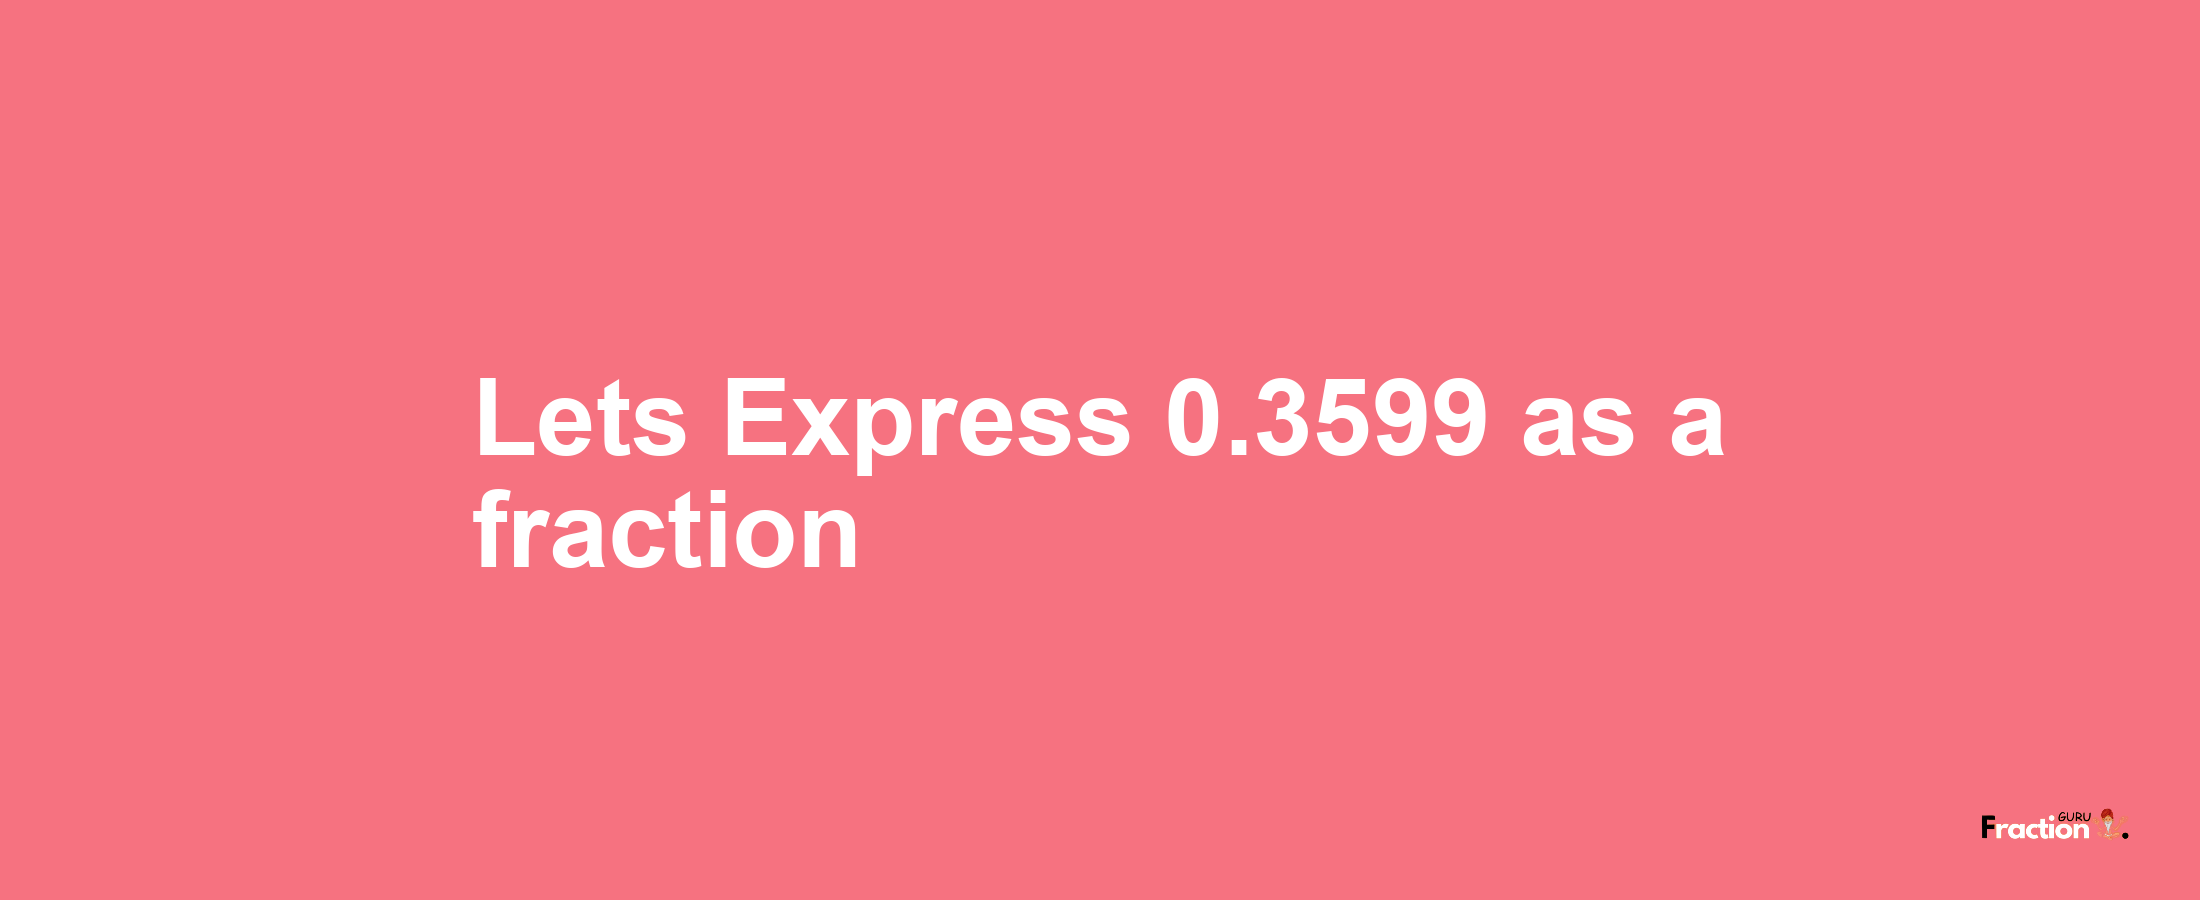 Lets Express 0.3599 as afraction